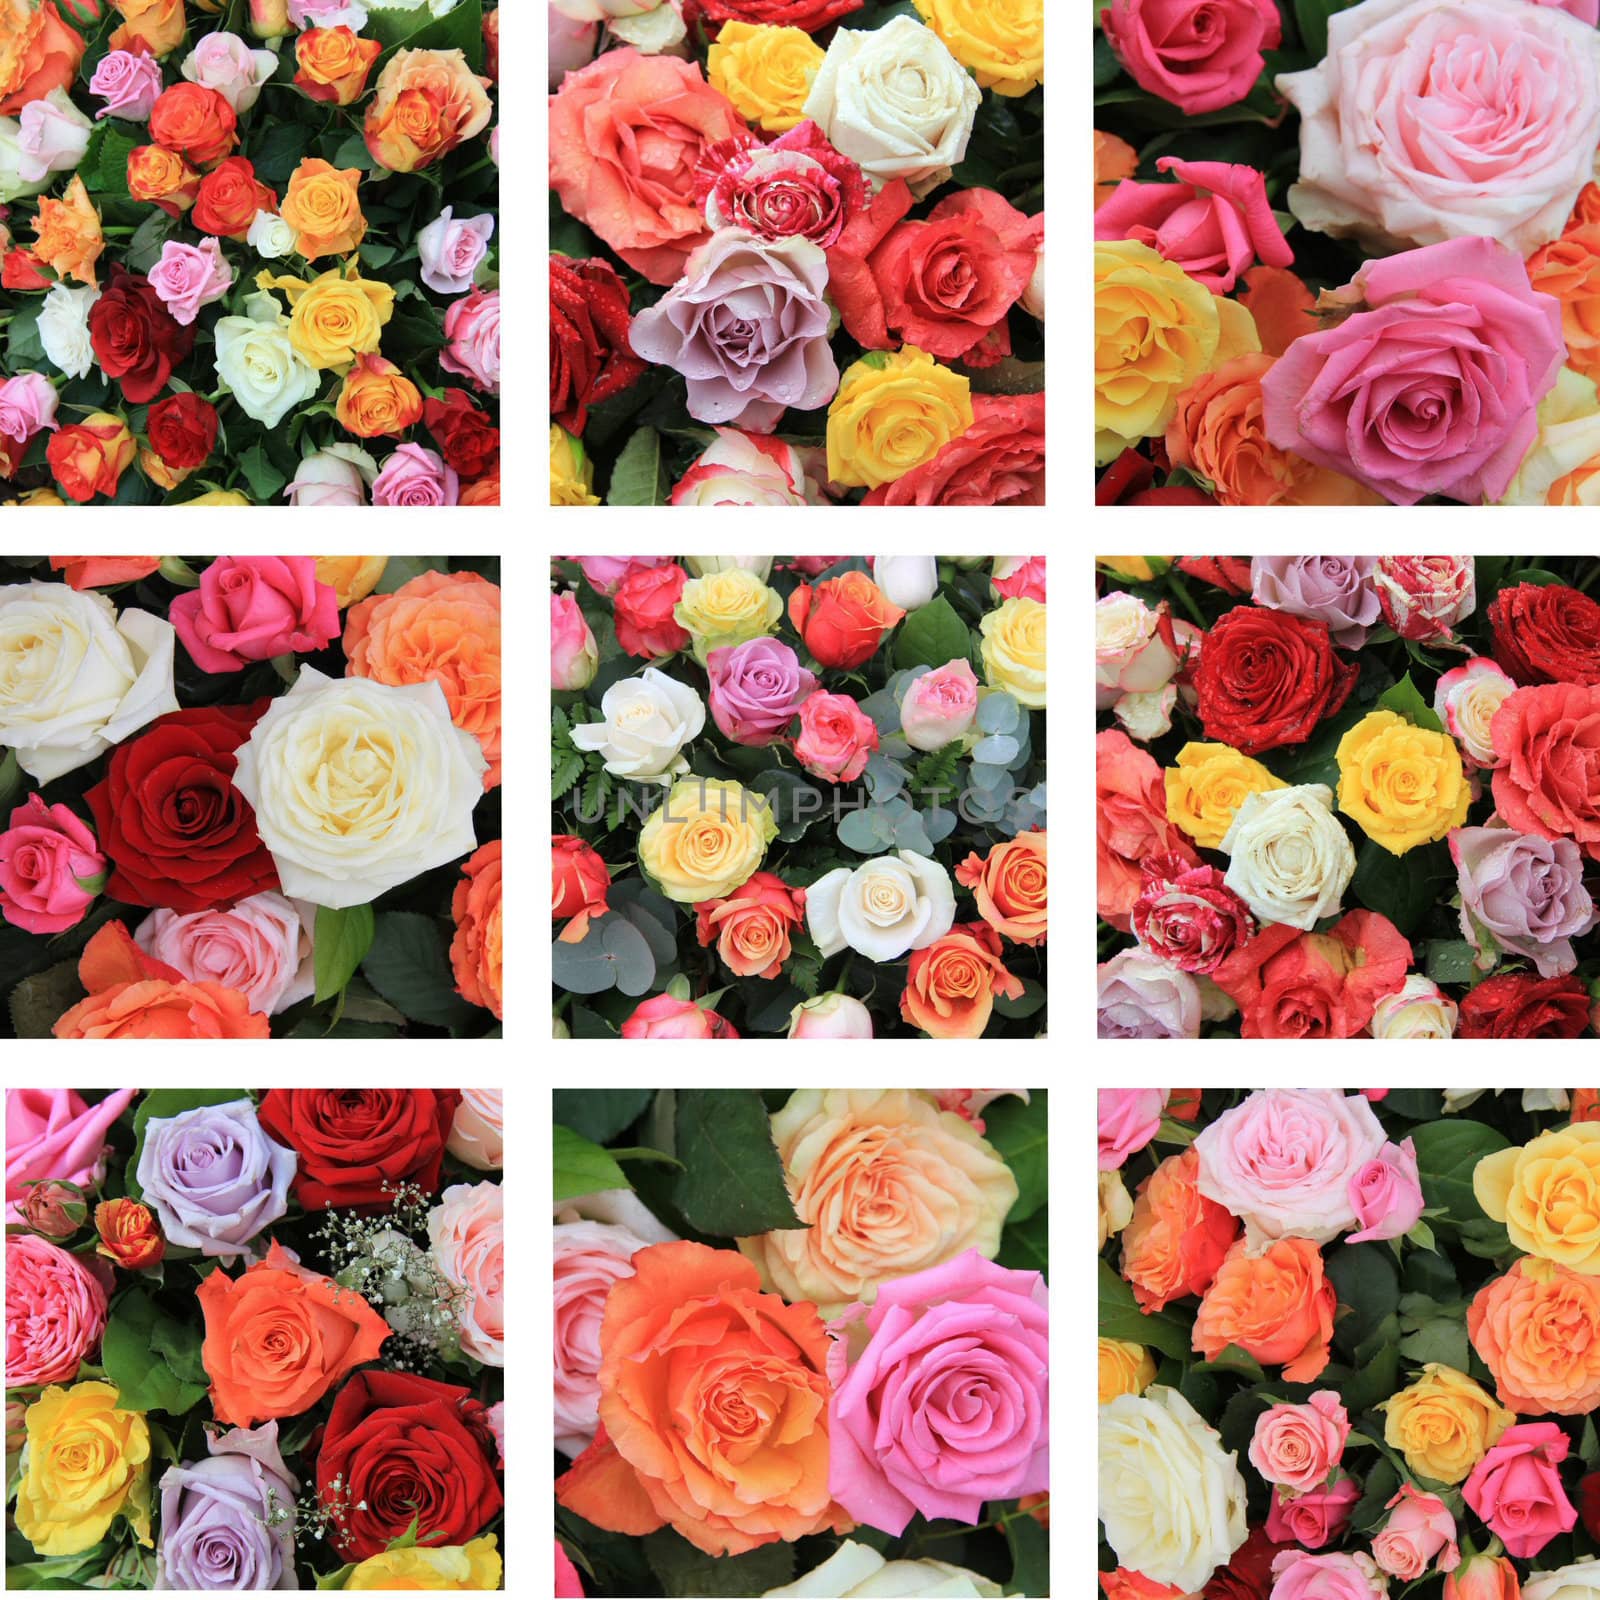 XL-collage made from 9 different high resolution rose images